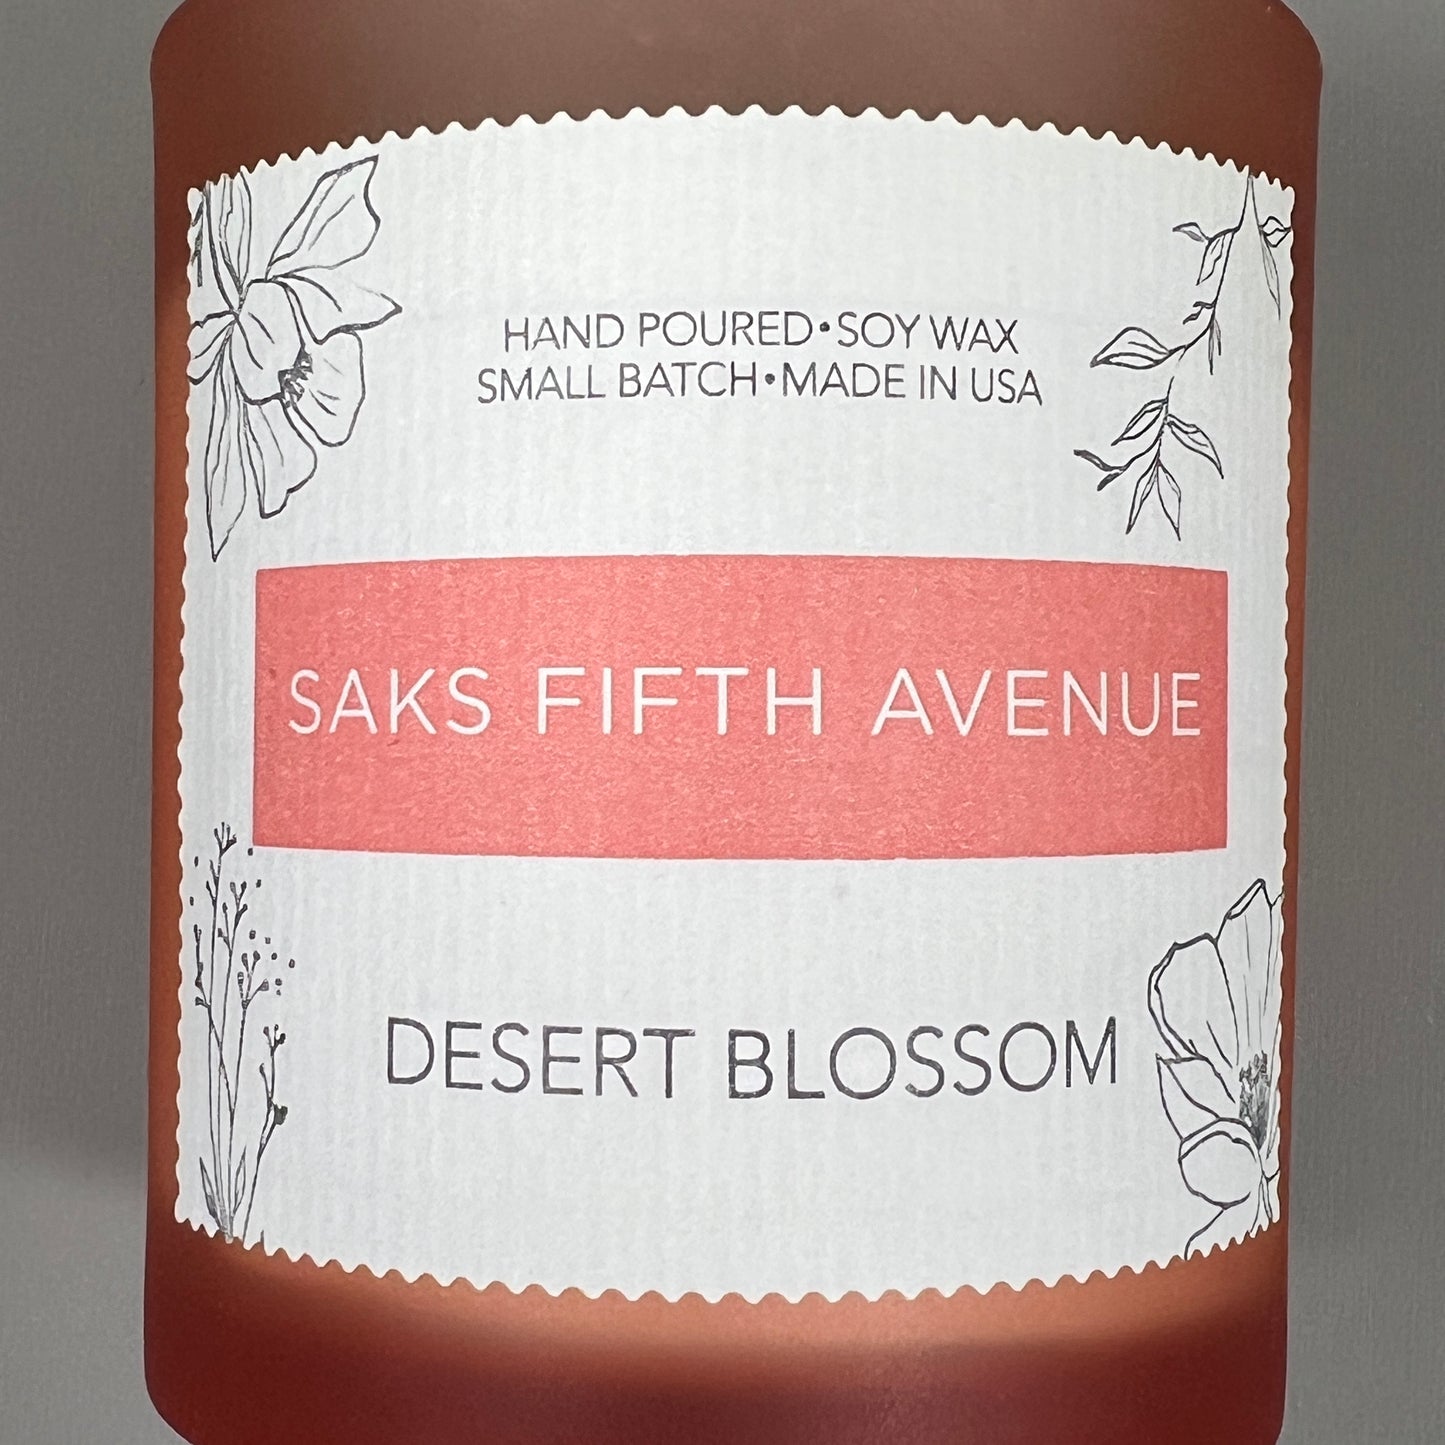 SAKS FIFTH AVENUE Desert Blossom Hand Poured Soy Wax Candle 8 fl oz (New)